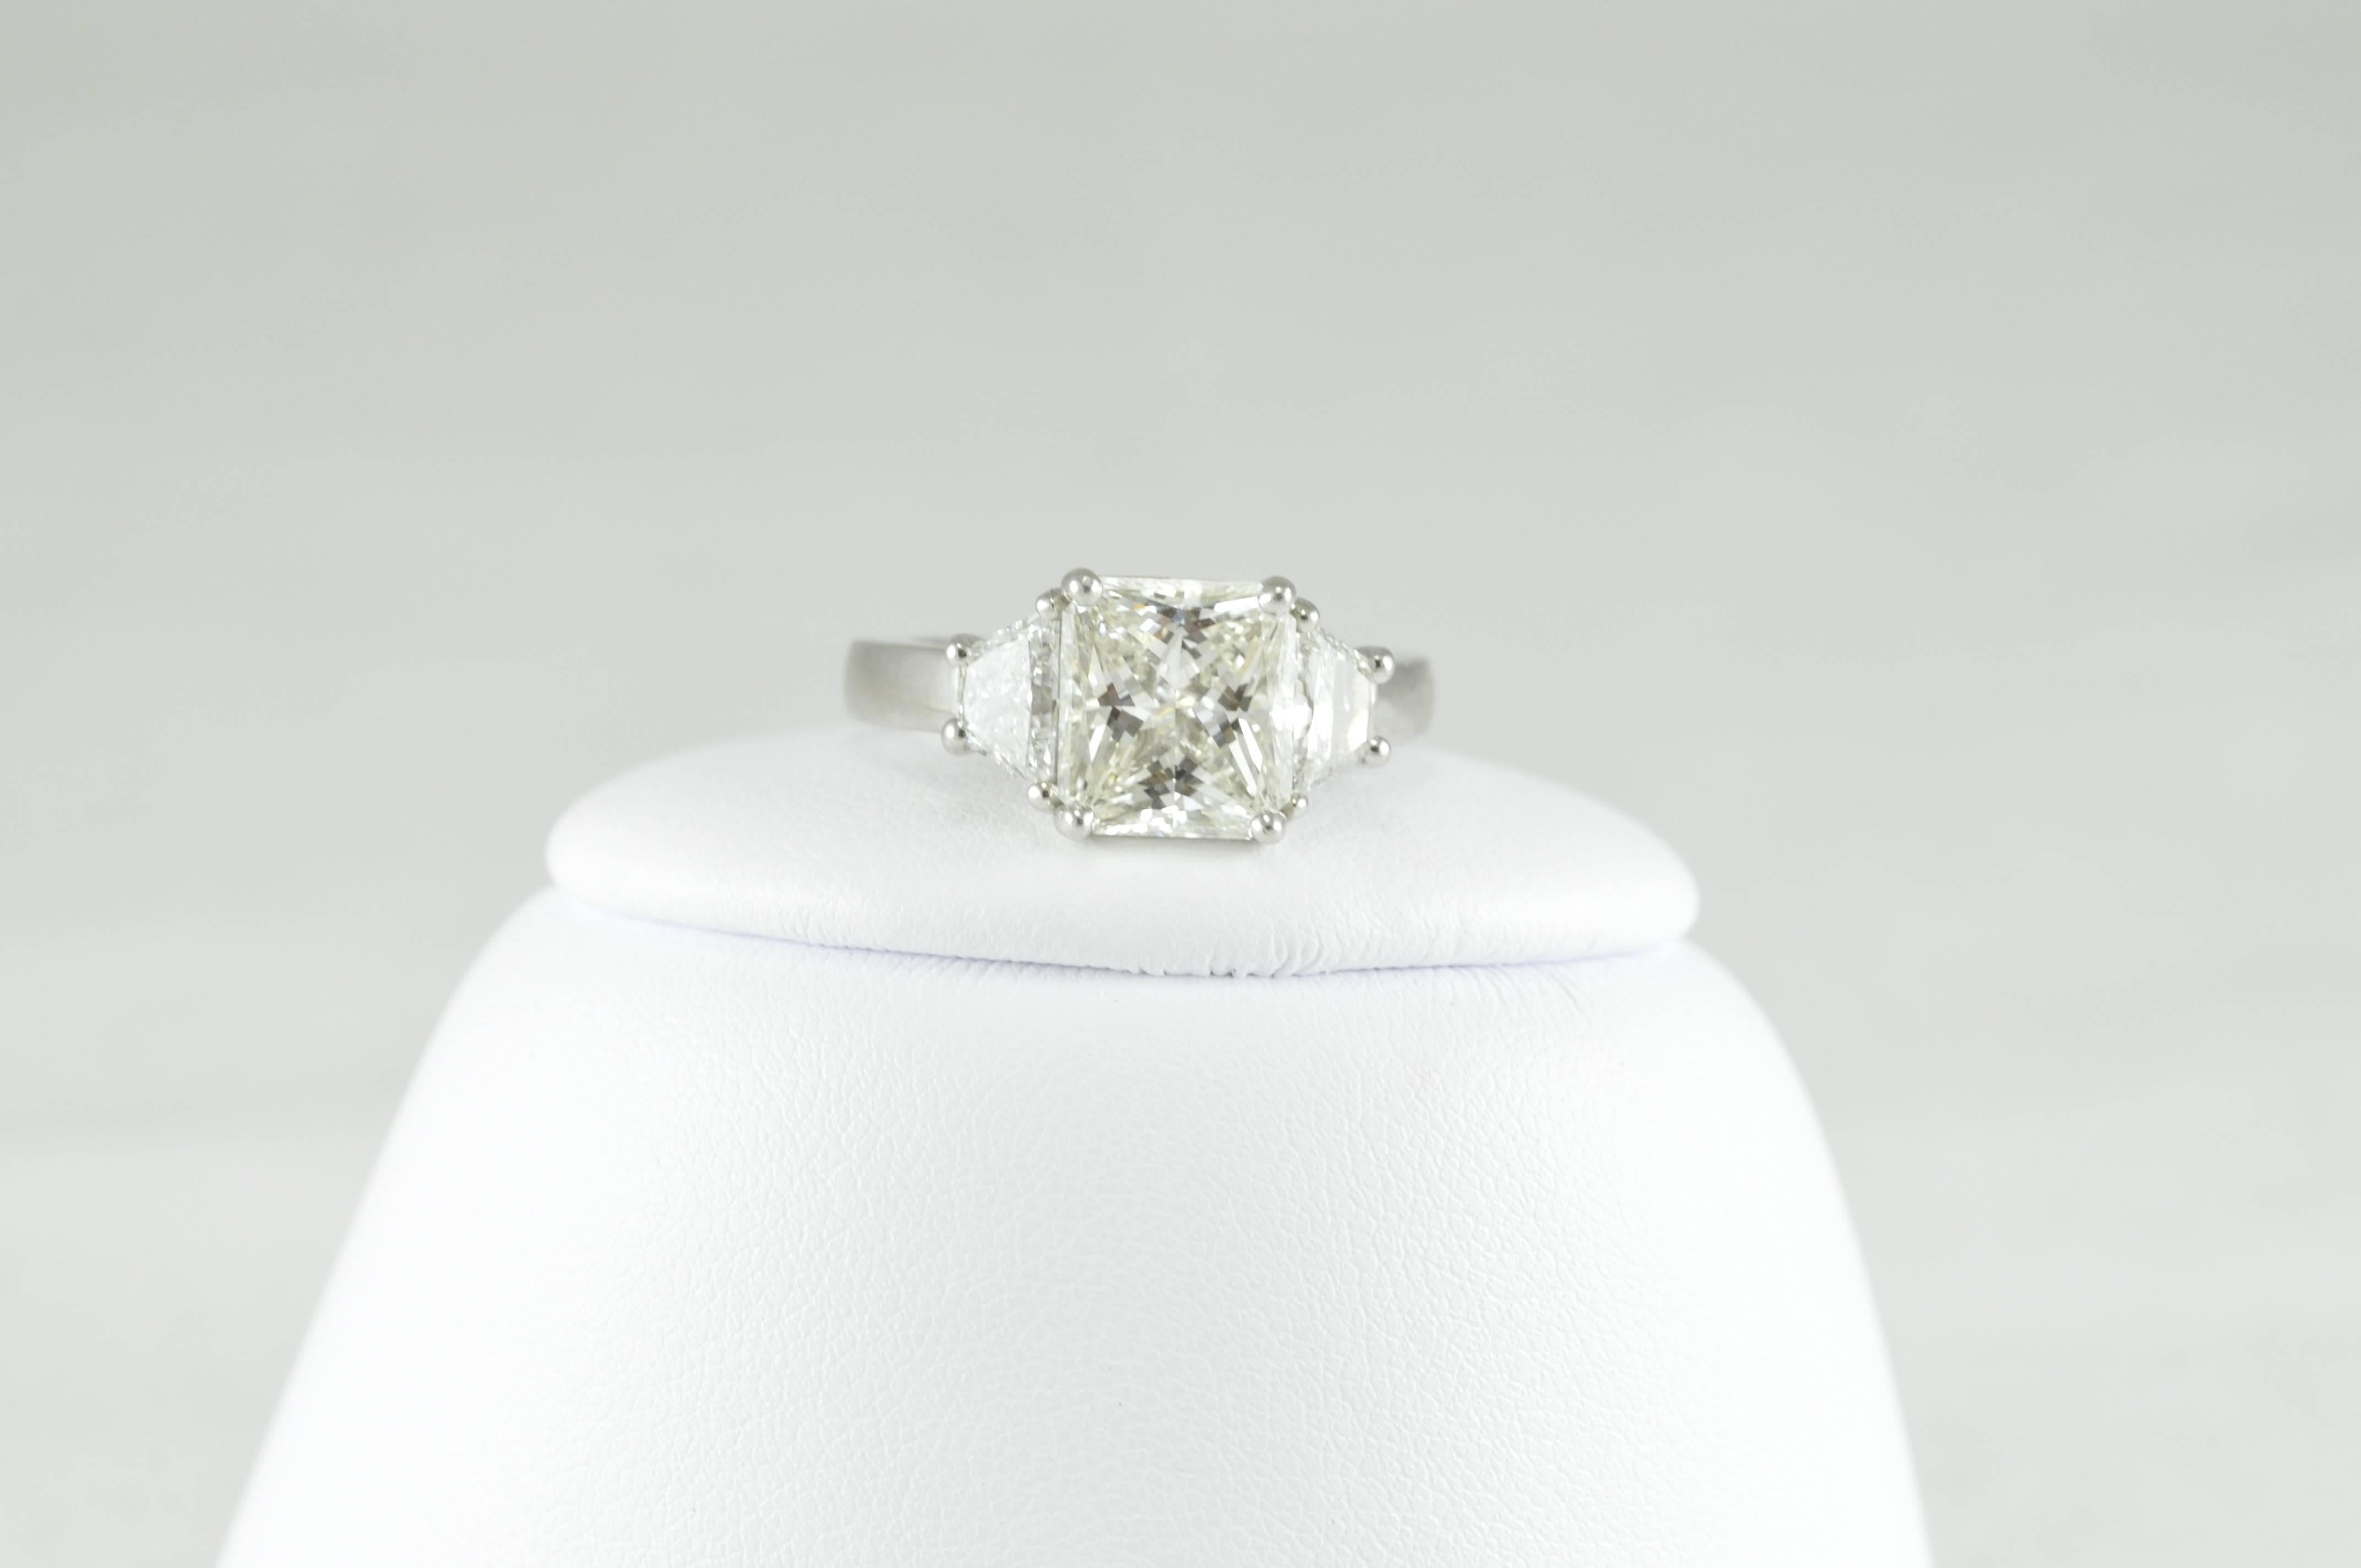 STUNNING Three Stone Platinum and Diamond Ring! 
3.28CT Radiant Cut Diamond J/SI1.  9.18x8.33x5.31mm. Polish Very Good. Symmetry Good.  Florescence Medium Blue.  
1.05CT Trapezoids
GIA Cert Upon Request
Stamped PLAT
Sized 6.25 and can be sized to